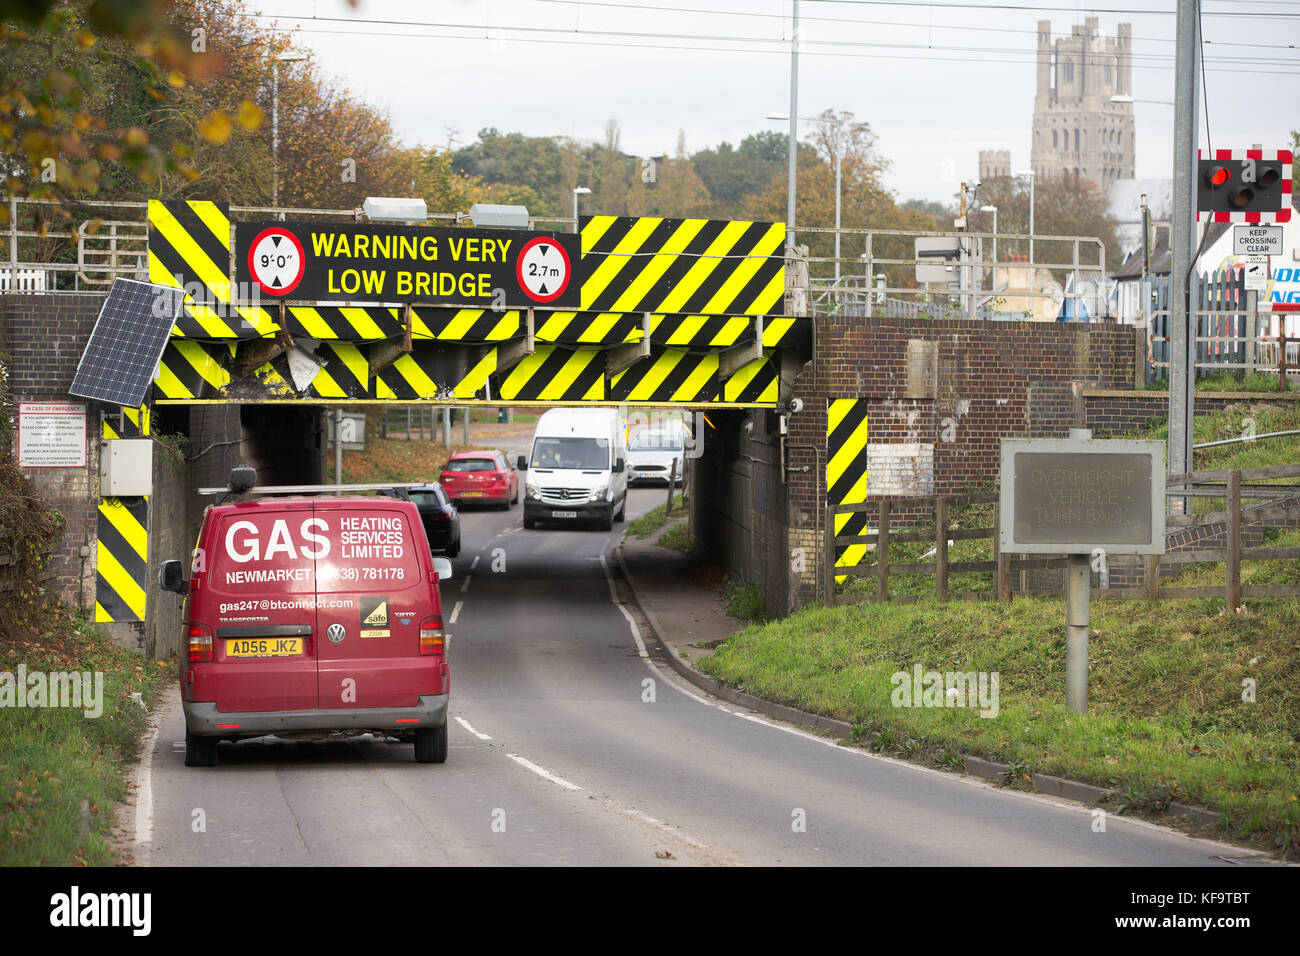 the Stuntney Road bridge in Ely,Cambs,on October 26th which has today been revealed as the most bashed bridge in Britain.  The most bashed bridge in Britain has been hit 113 times in the last eight years, it has been revealed today (Thurs).  Stuntney Road bridge in Ely, Cambridgeshire has had the most strikes, according to new information released by Network Rail.  The railway suffers almost 2,000 bridge strikes every year costing the taxpayer some £23 million in damages and delays.  The end of this month sees a peak in the number of strikes, rising to almost 10 per day. Stock Photo